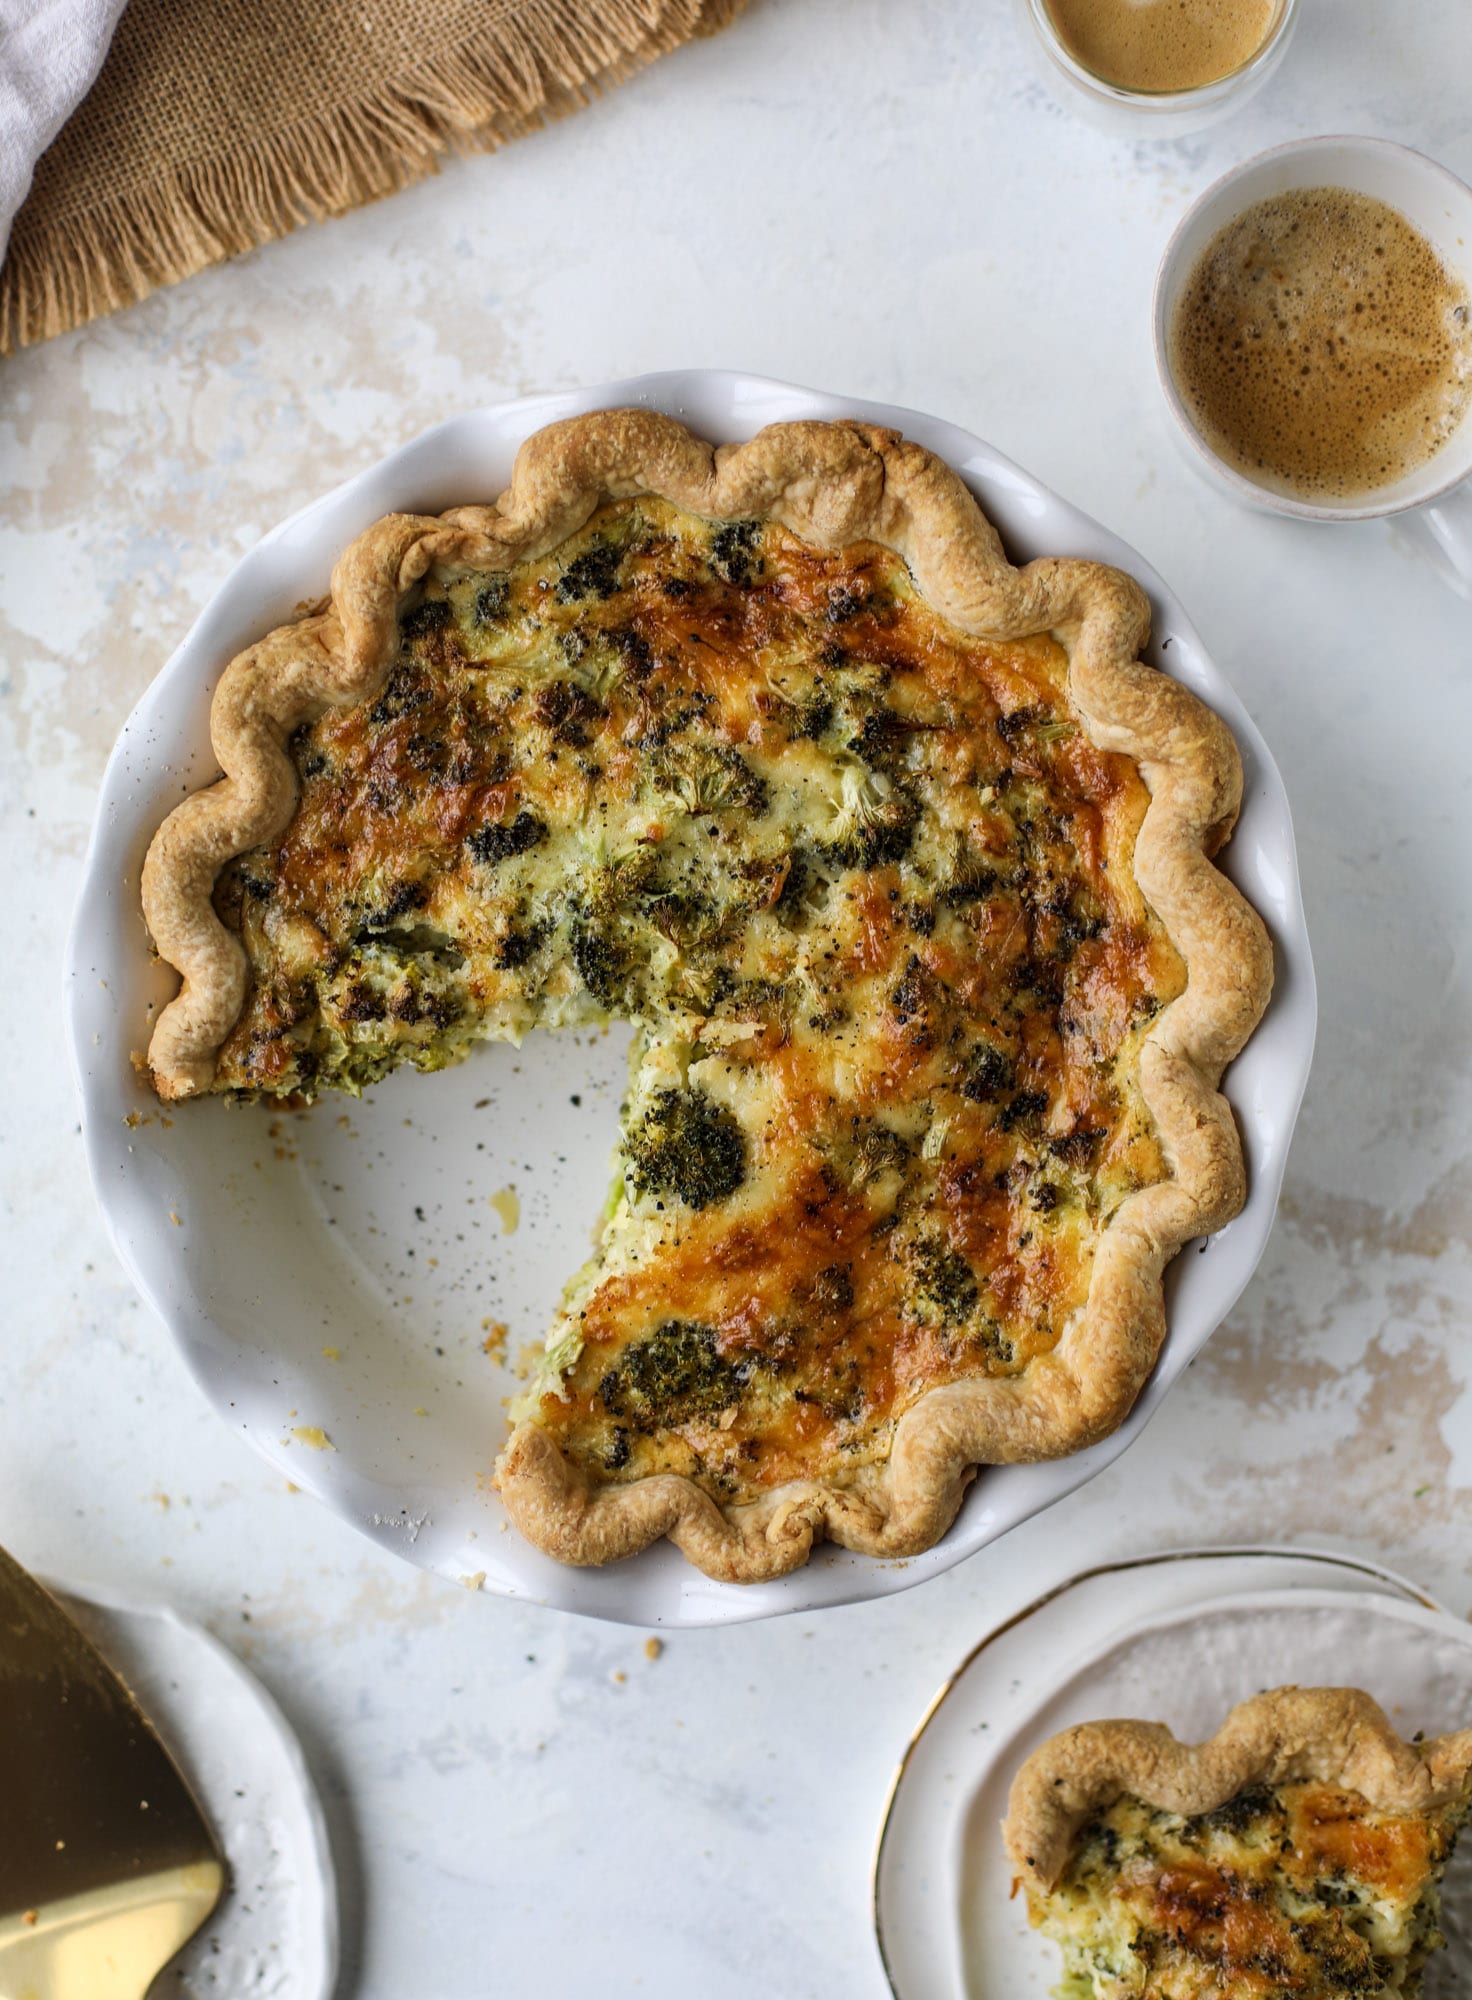 This broccoli cheese quiche is absolutely perfect for brunch, lunch or even dinner! It's delicious served warm or cold, perfect paired with a greens salad and is a recipe that can be made ahead of time! I howsweeteats.com #broccolicheese #quiche